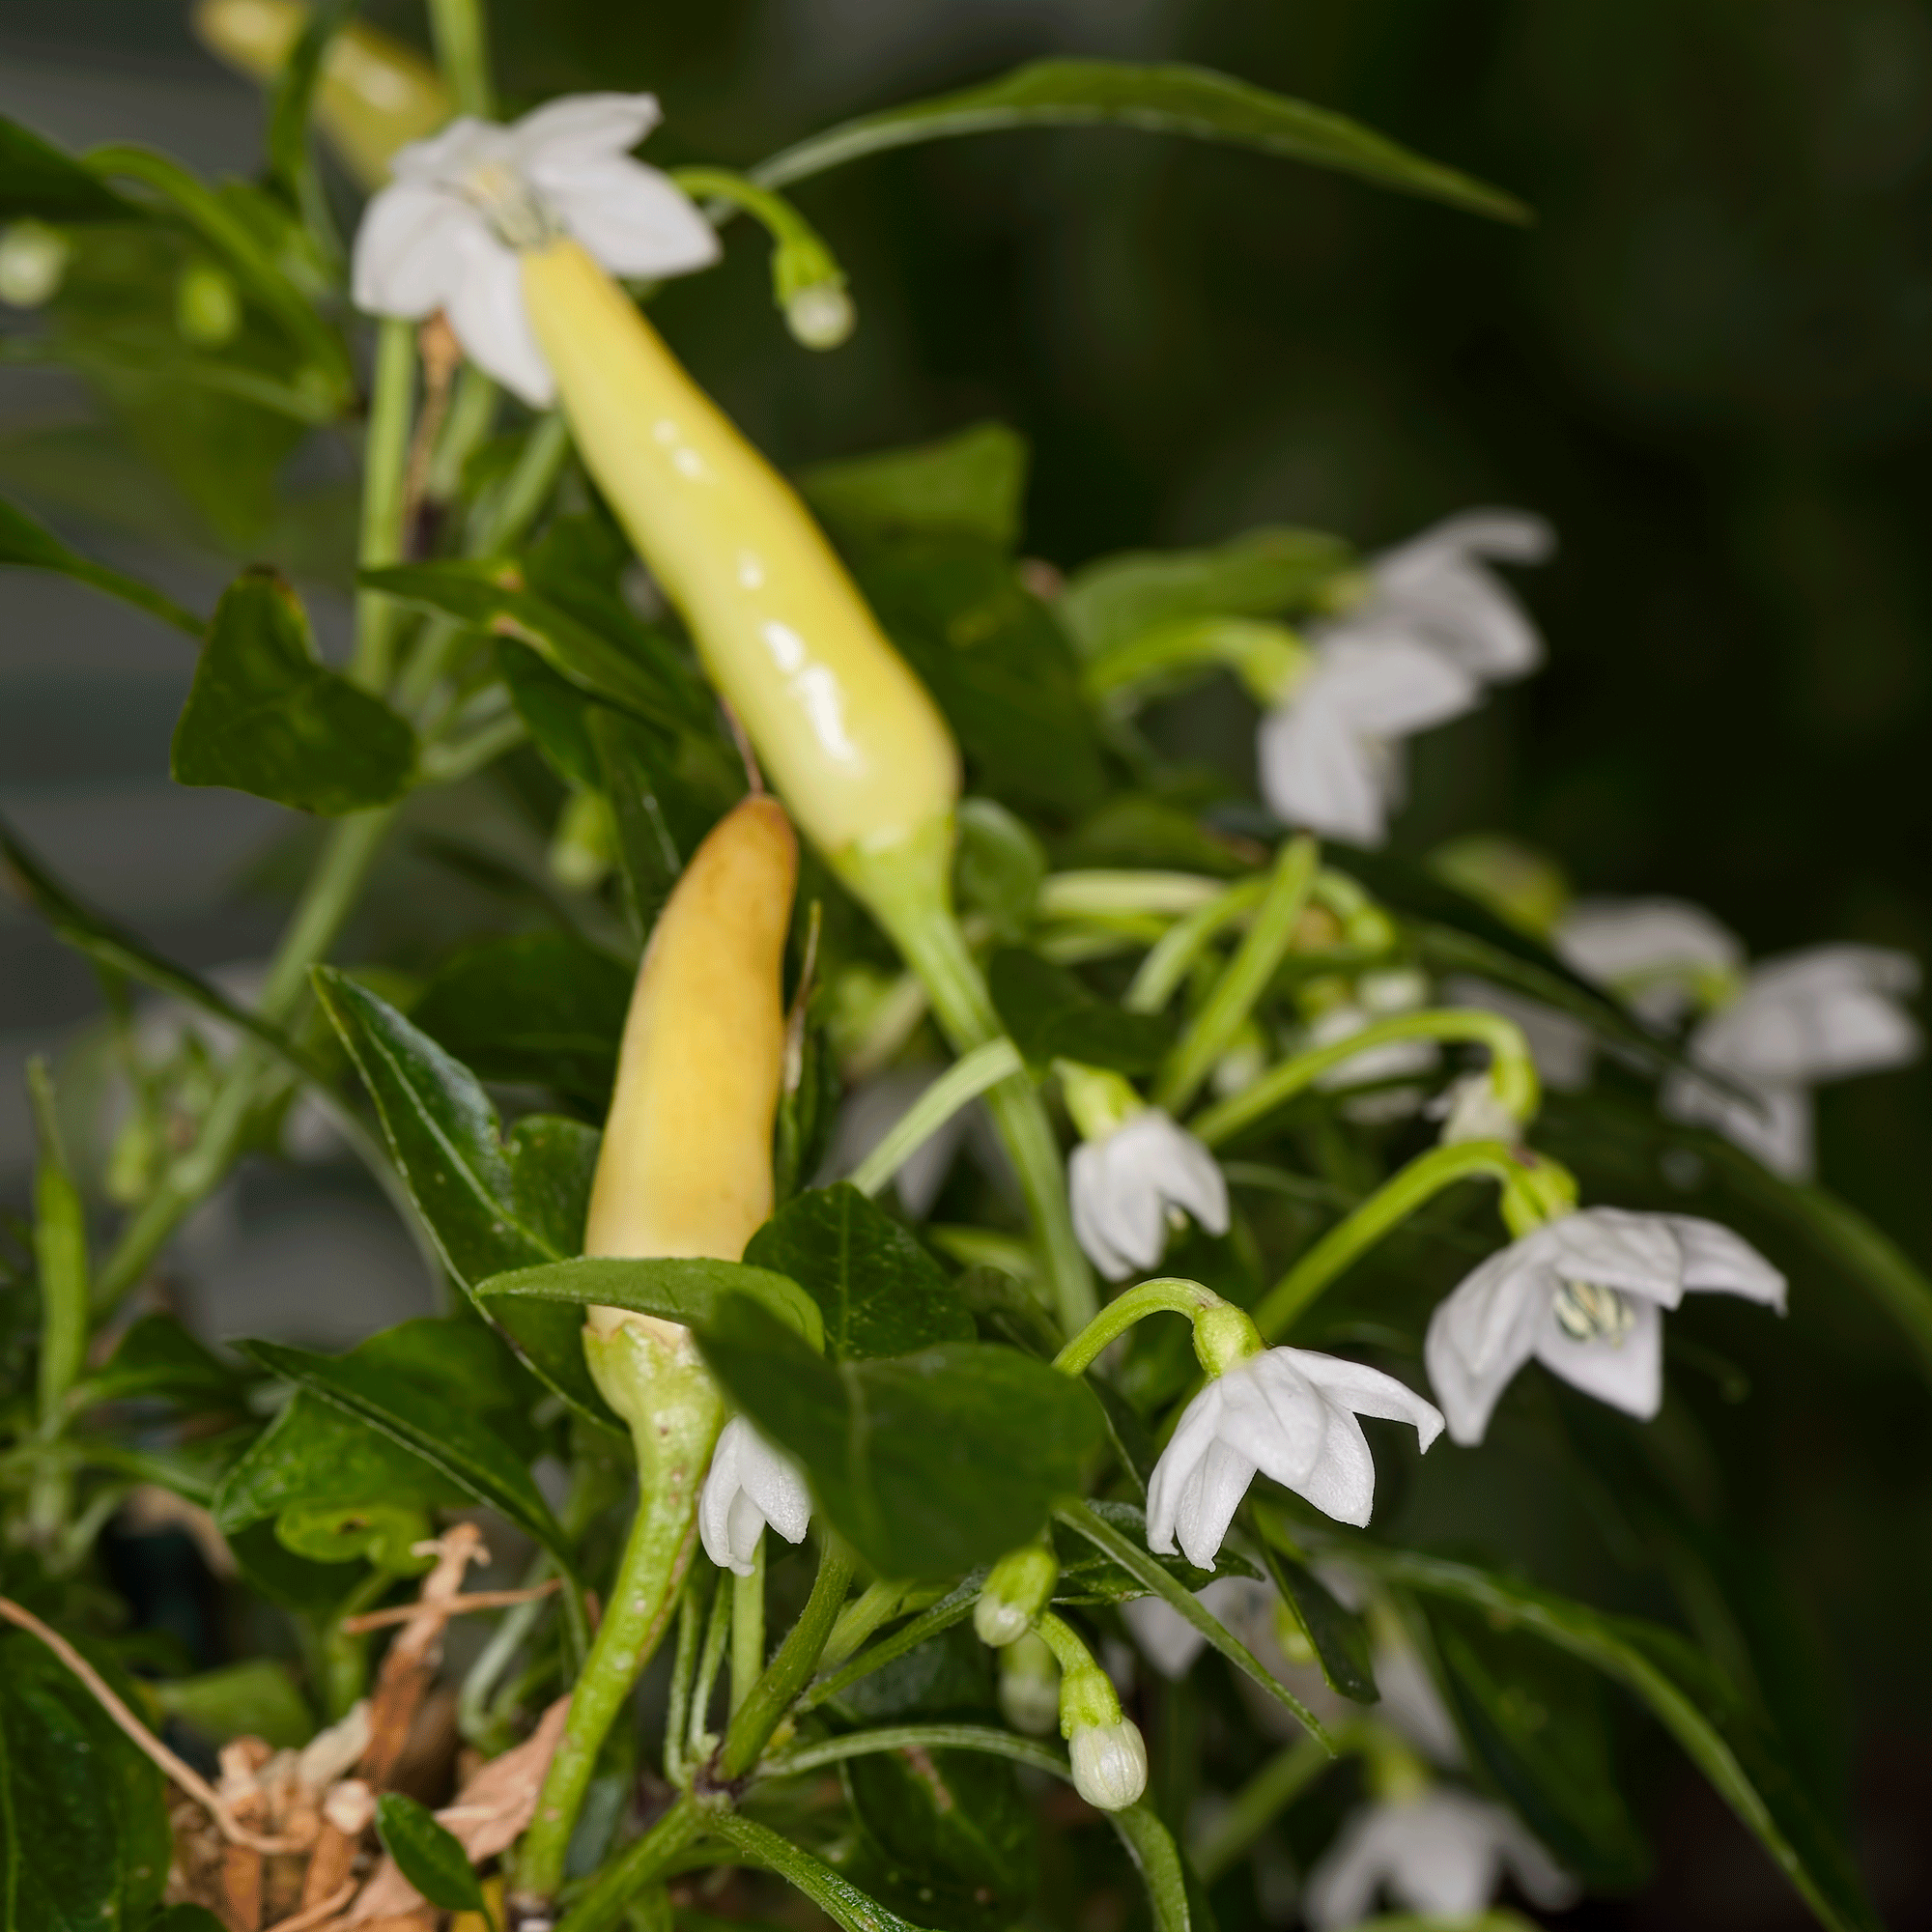 Chillis with white flowers